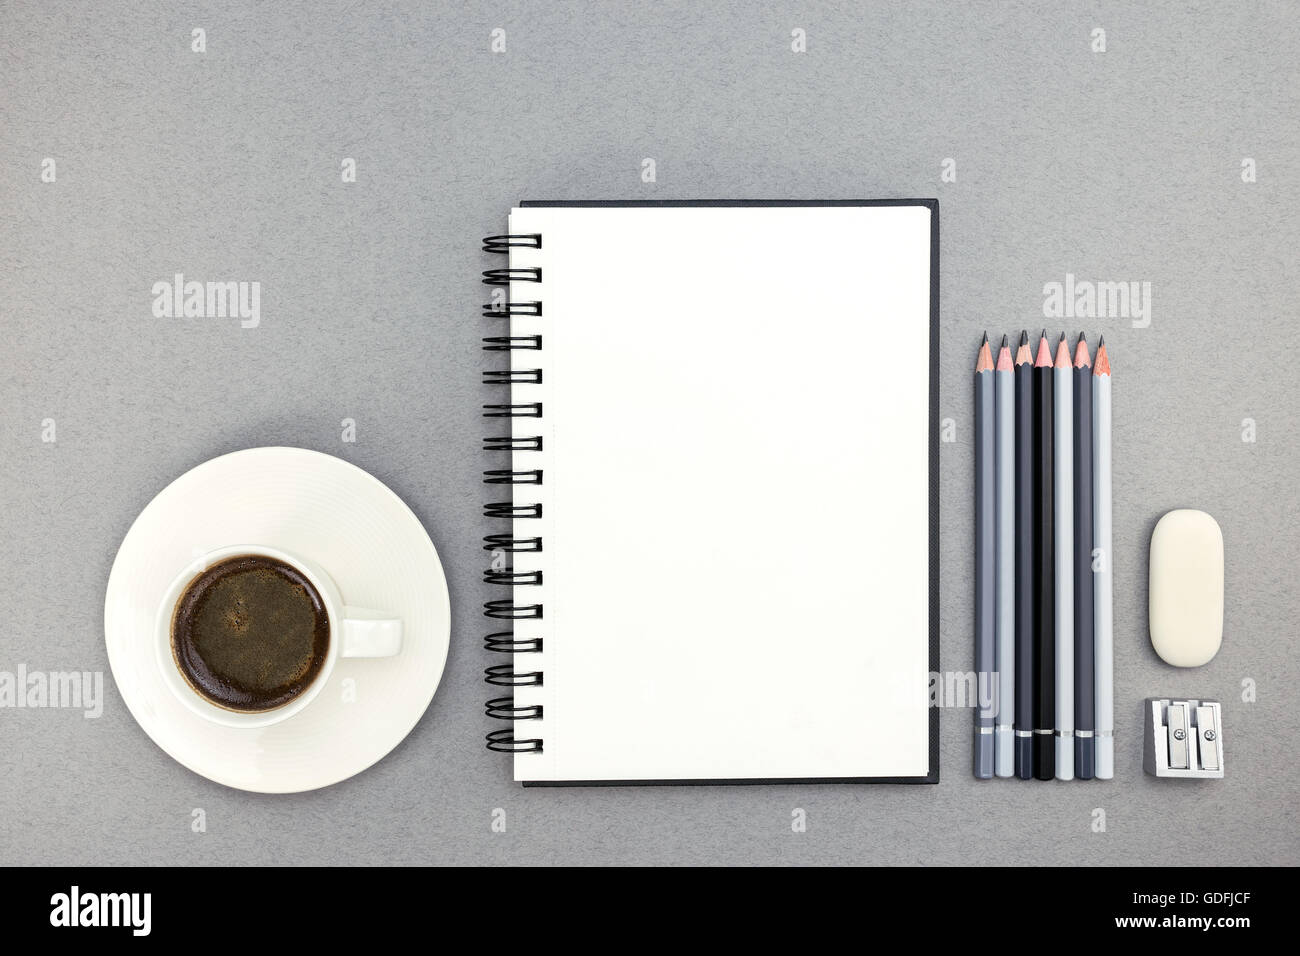 cup of coffee and notebook with drawing tools on desk, top view Stock Photo